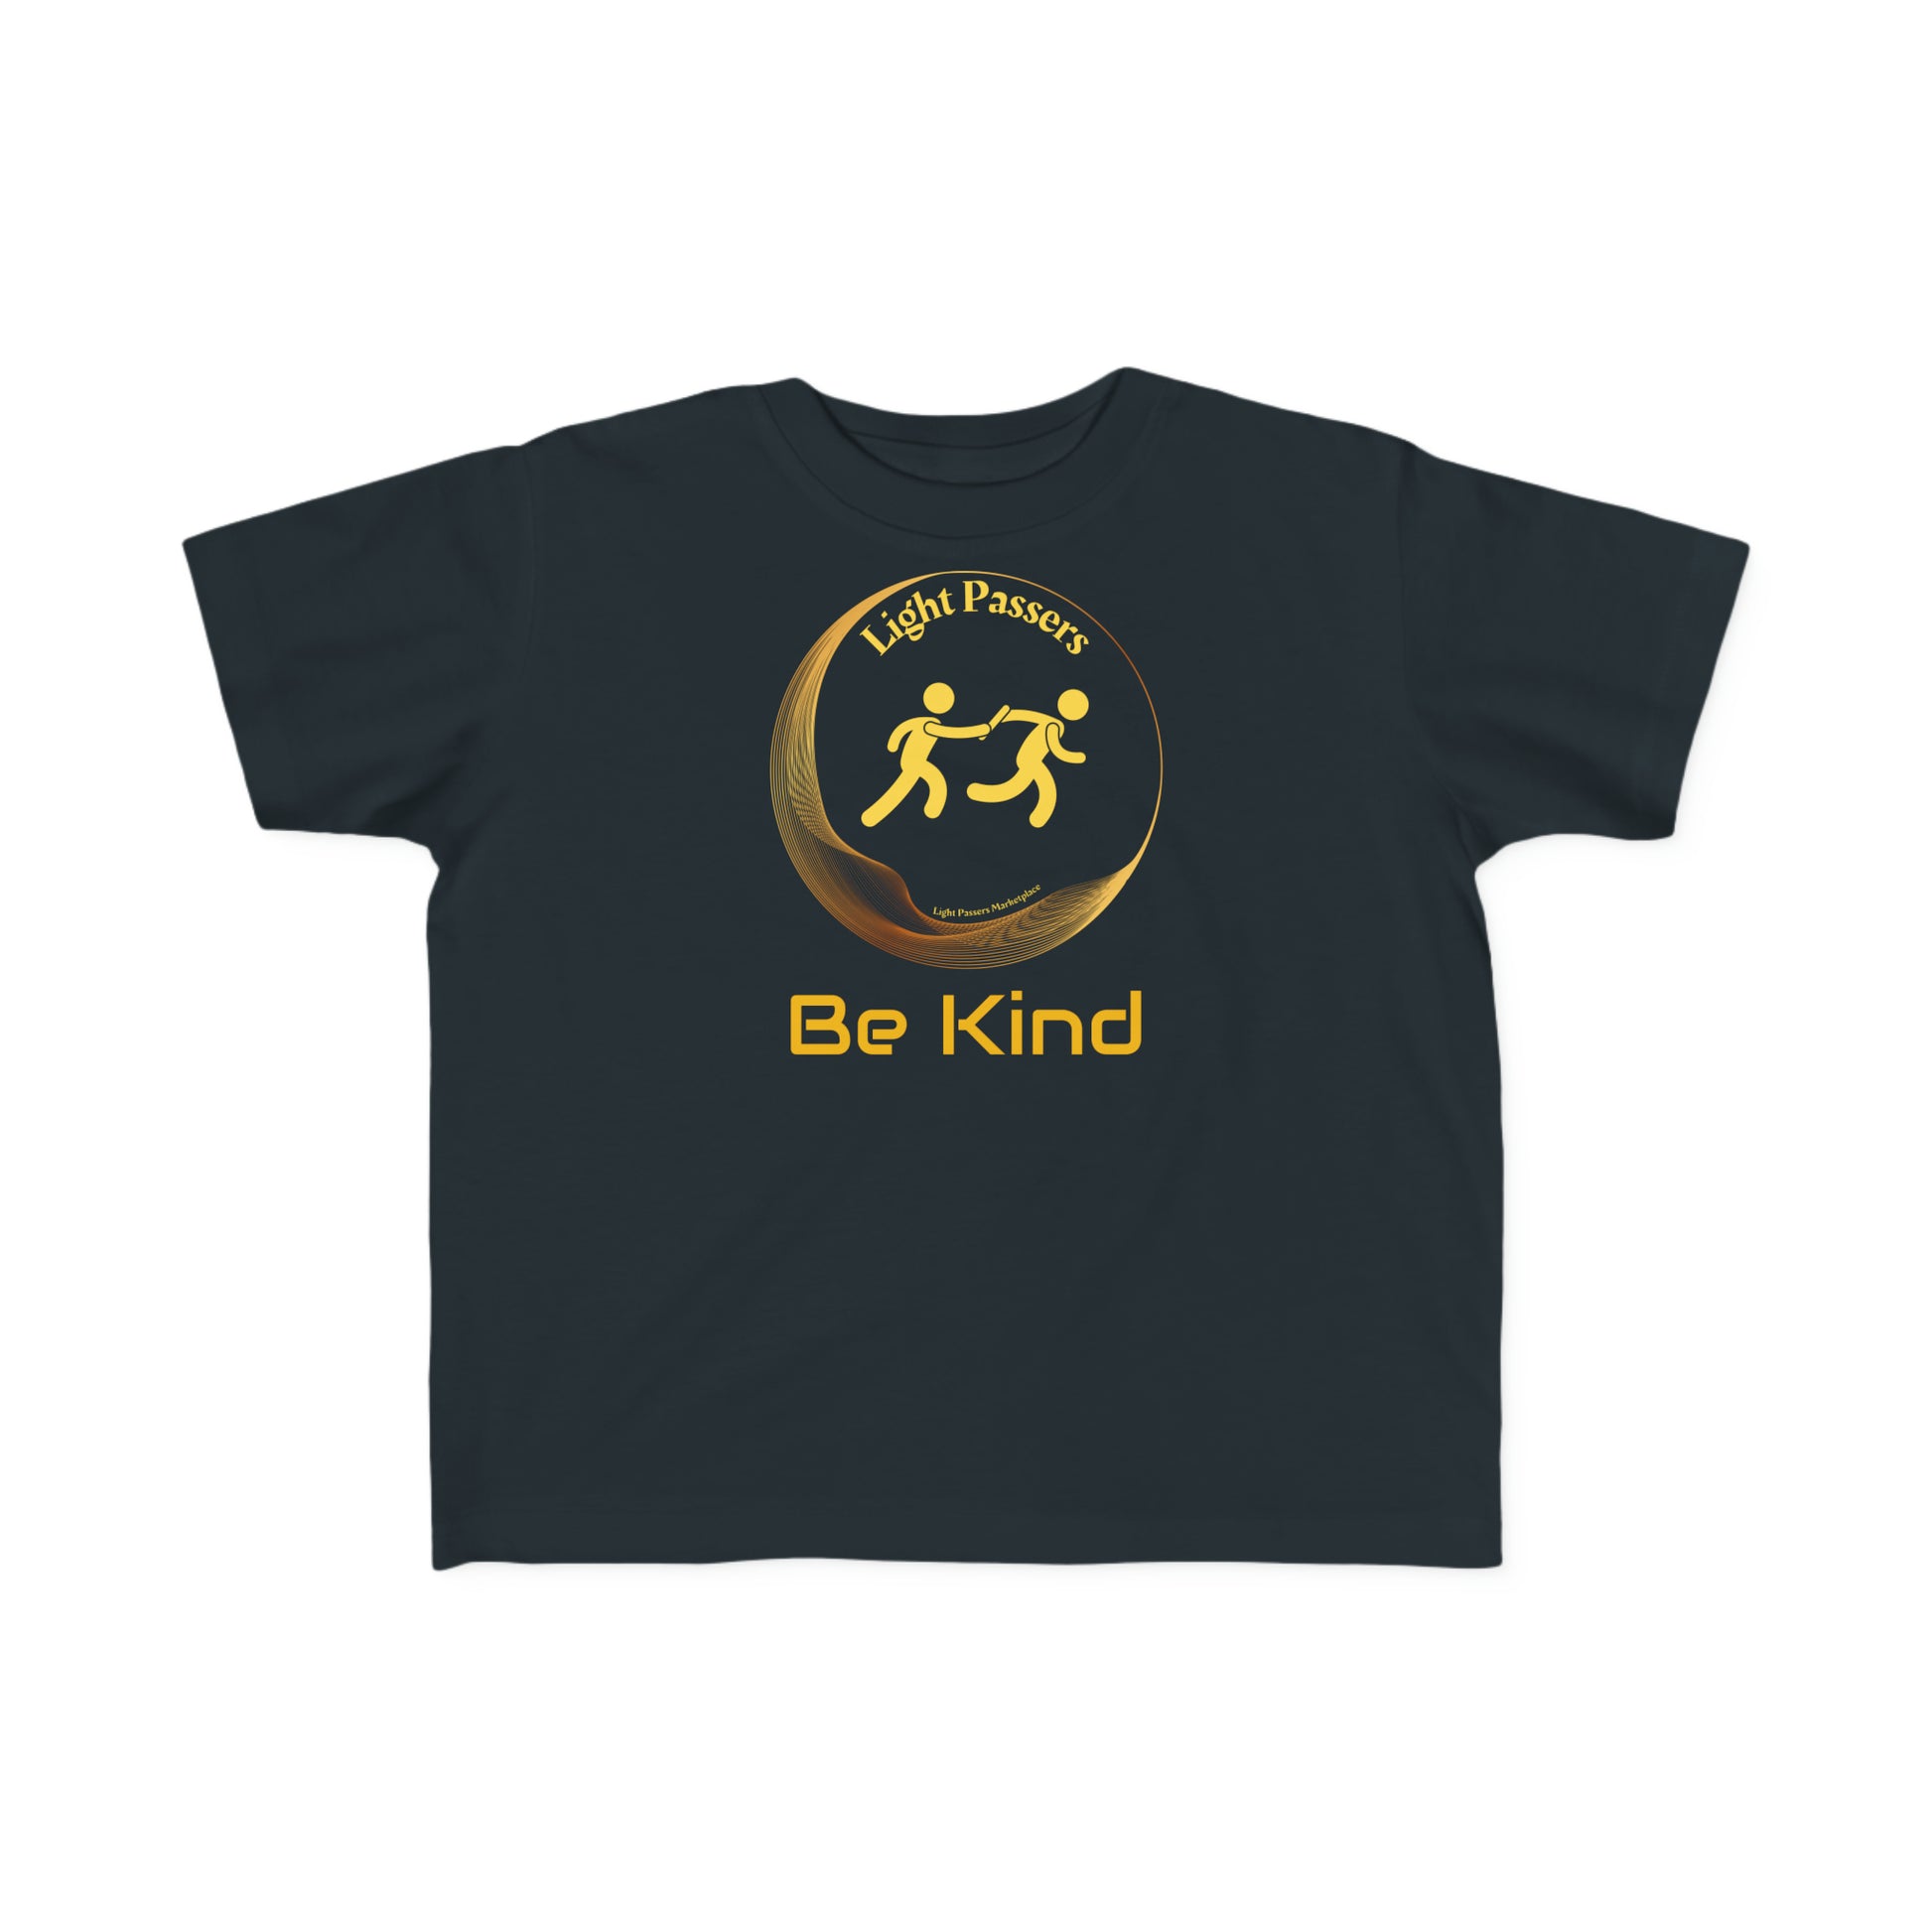 A toddler's tee featuring Light Passers Relay Be Kind logo on black fabric. Soft 100% combed cotton, durable print, tear-away label, classic fit. Ideal for sensitive skin, first adventures.